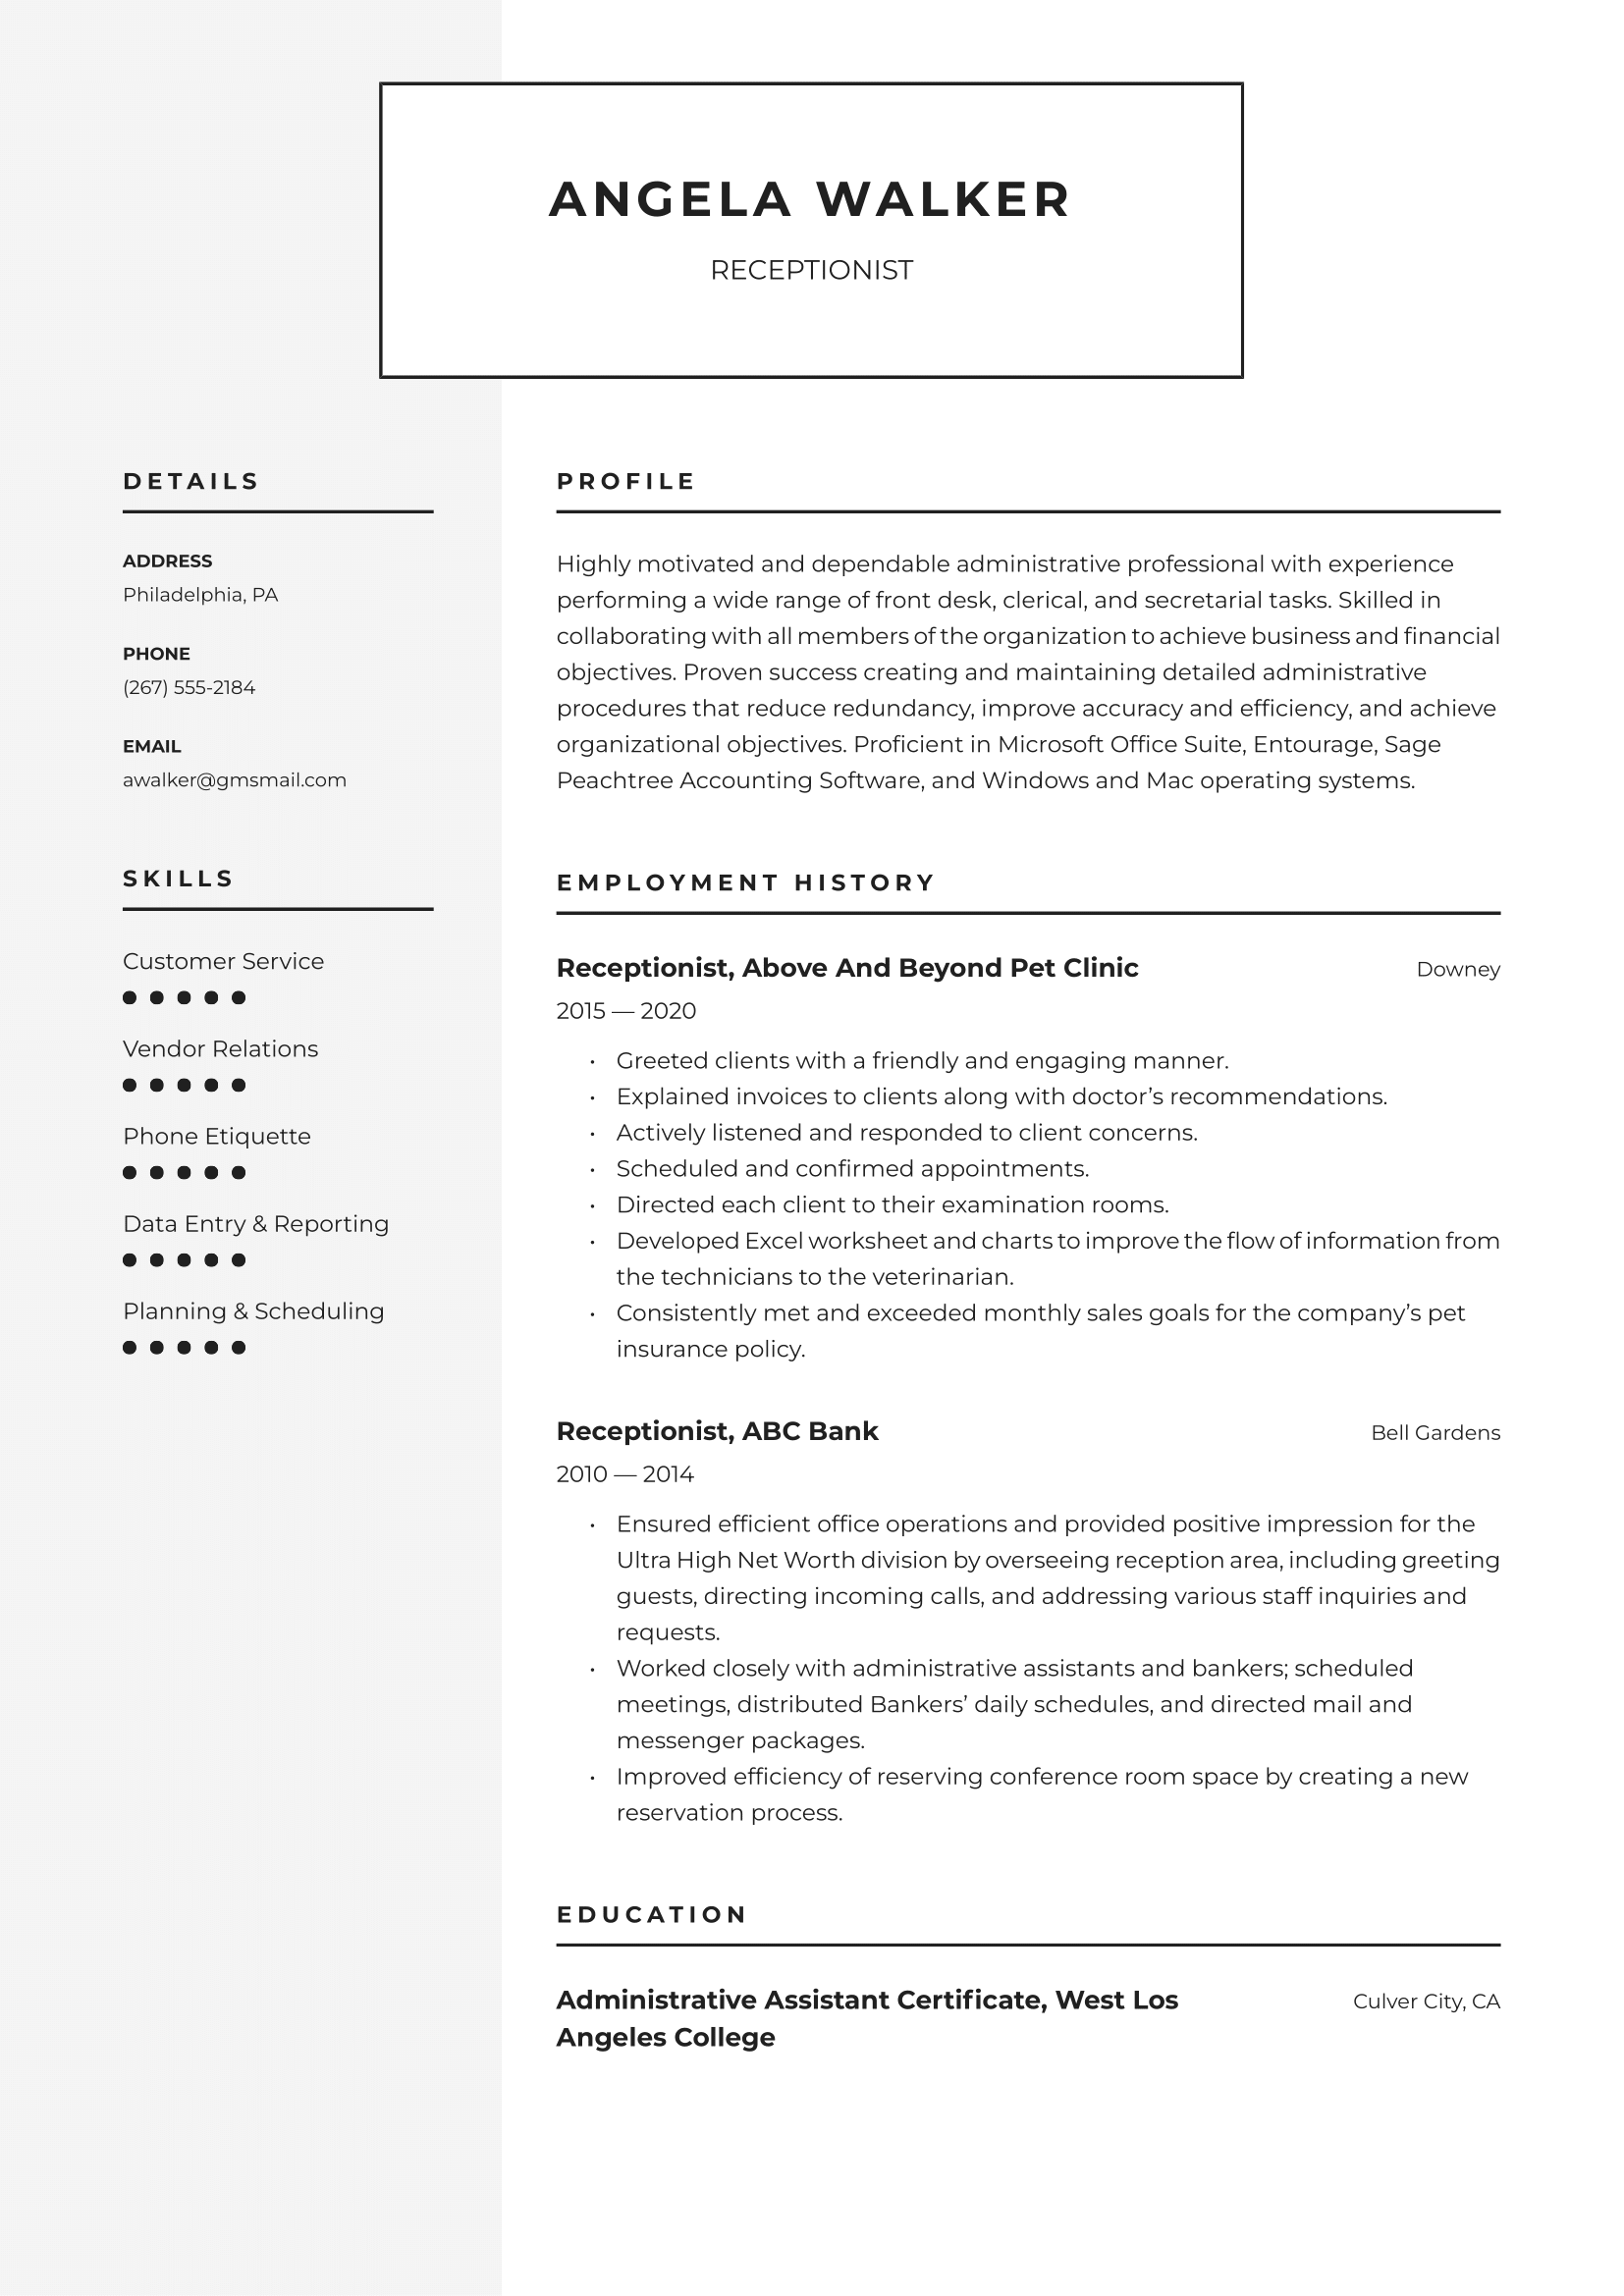 Receptionist-Resume-Example.png